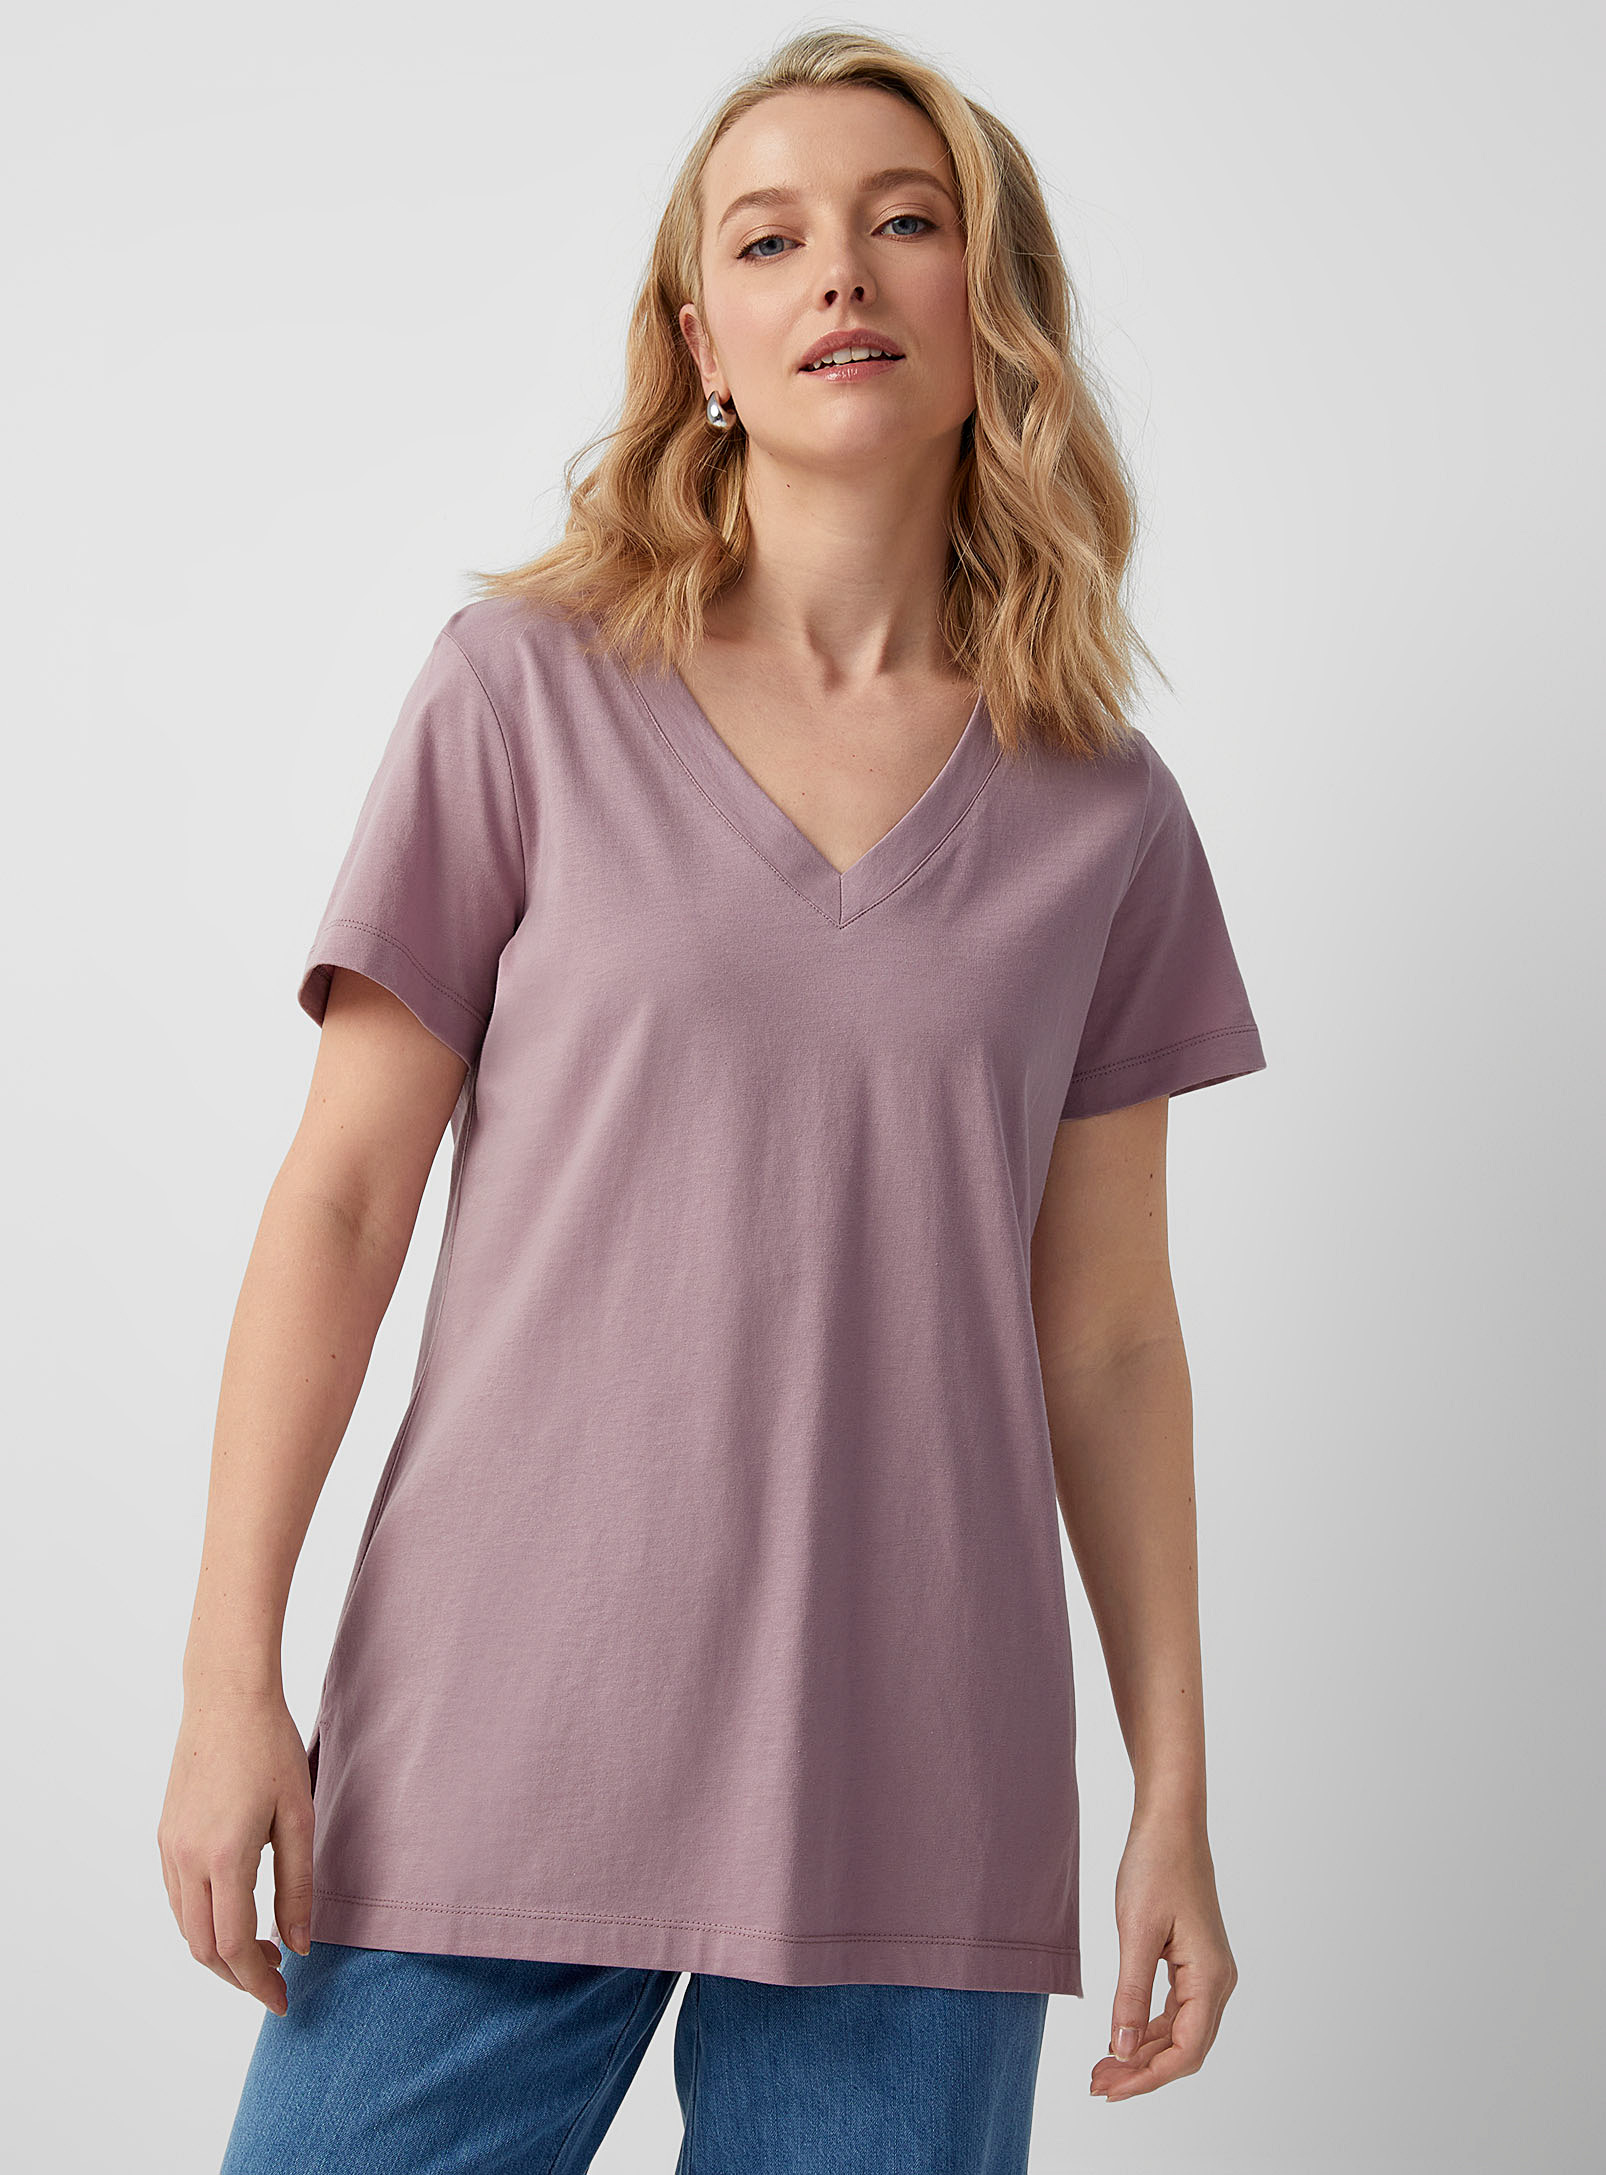 Contemporaine V-neck Tunic T-shirt In Dusky Pink